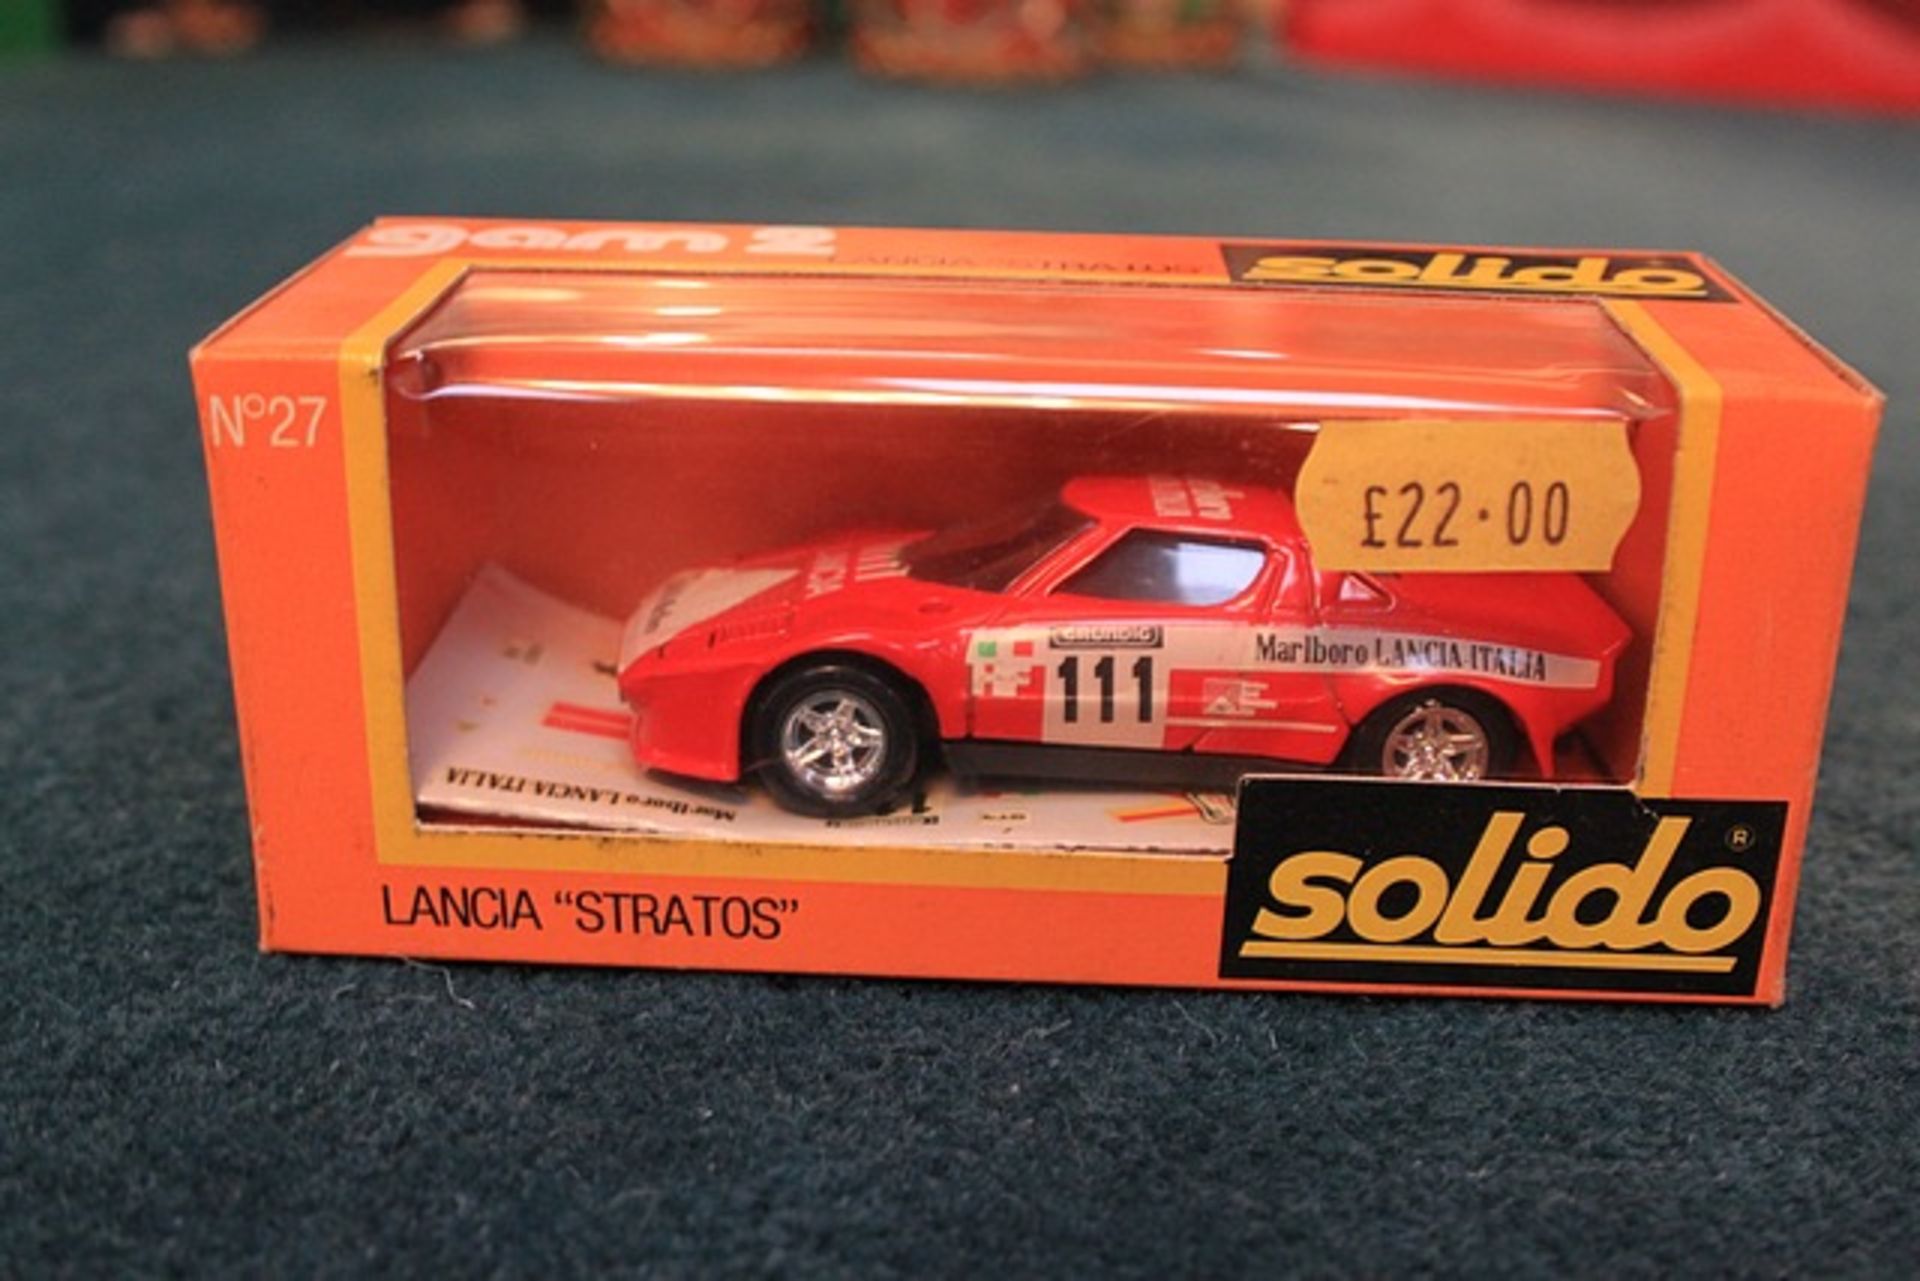 Solido GAM2 #27 Diecast Lancia Stratos In Red With Racing Number 111 Complete In Box - Image 2 of 2